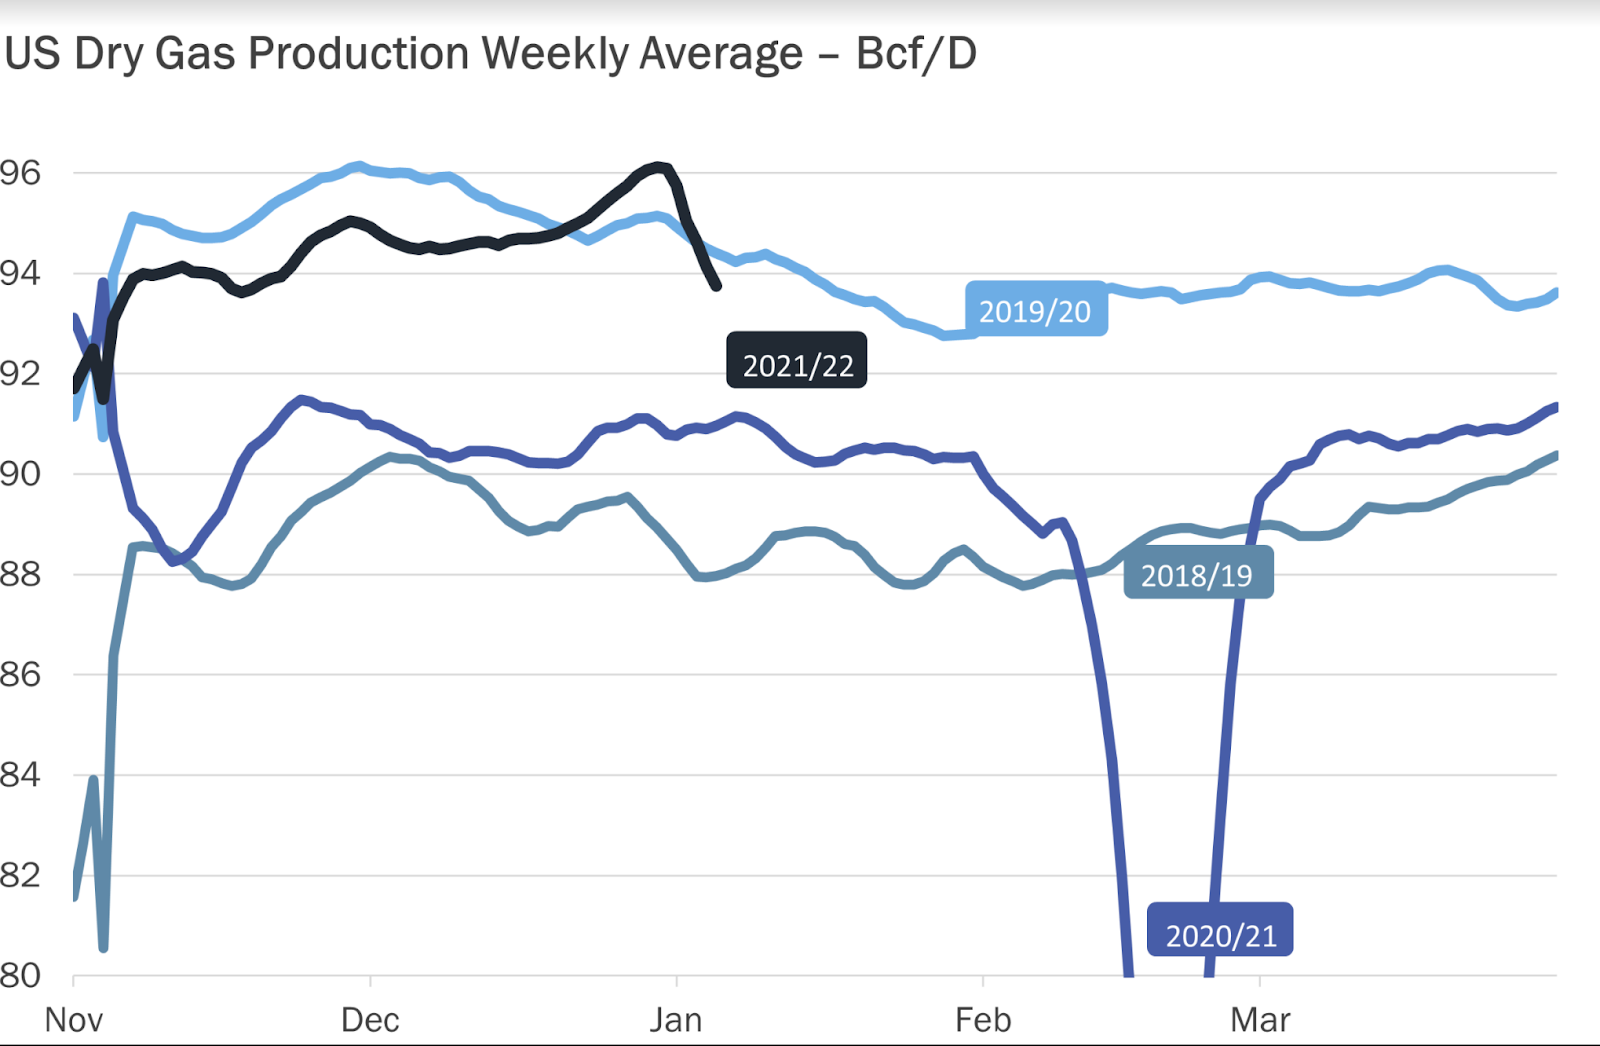 US Dry Gas Weekly Average Production